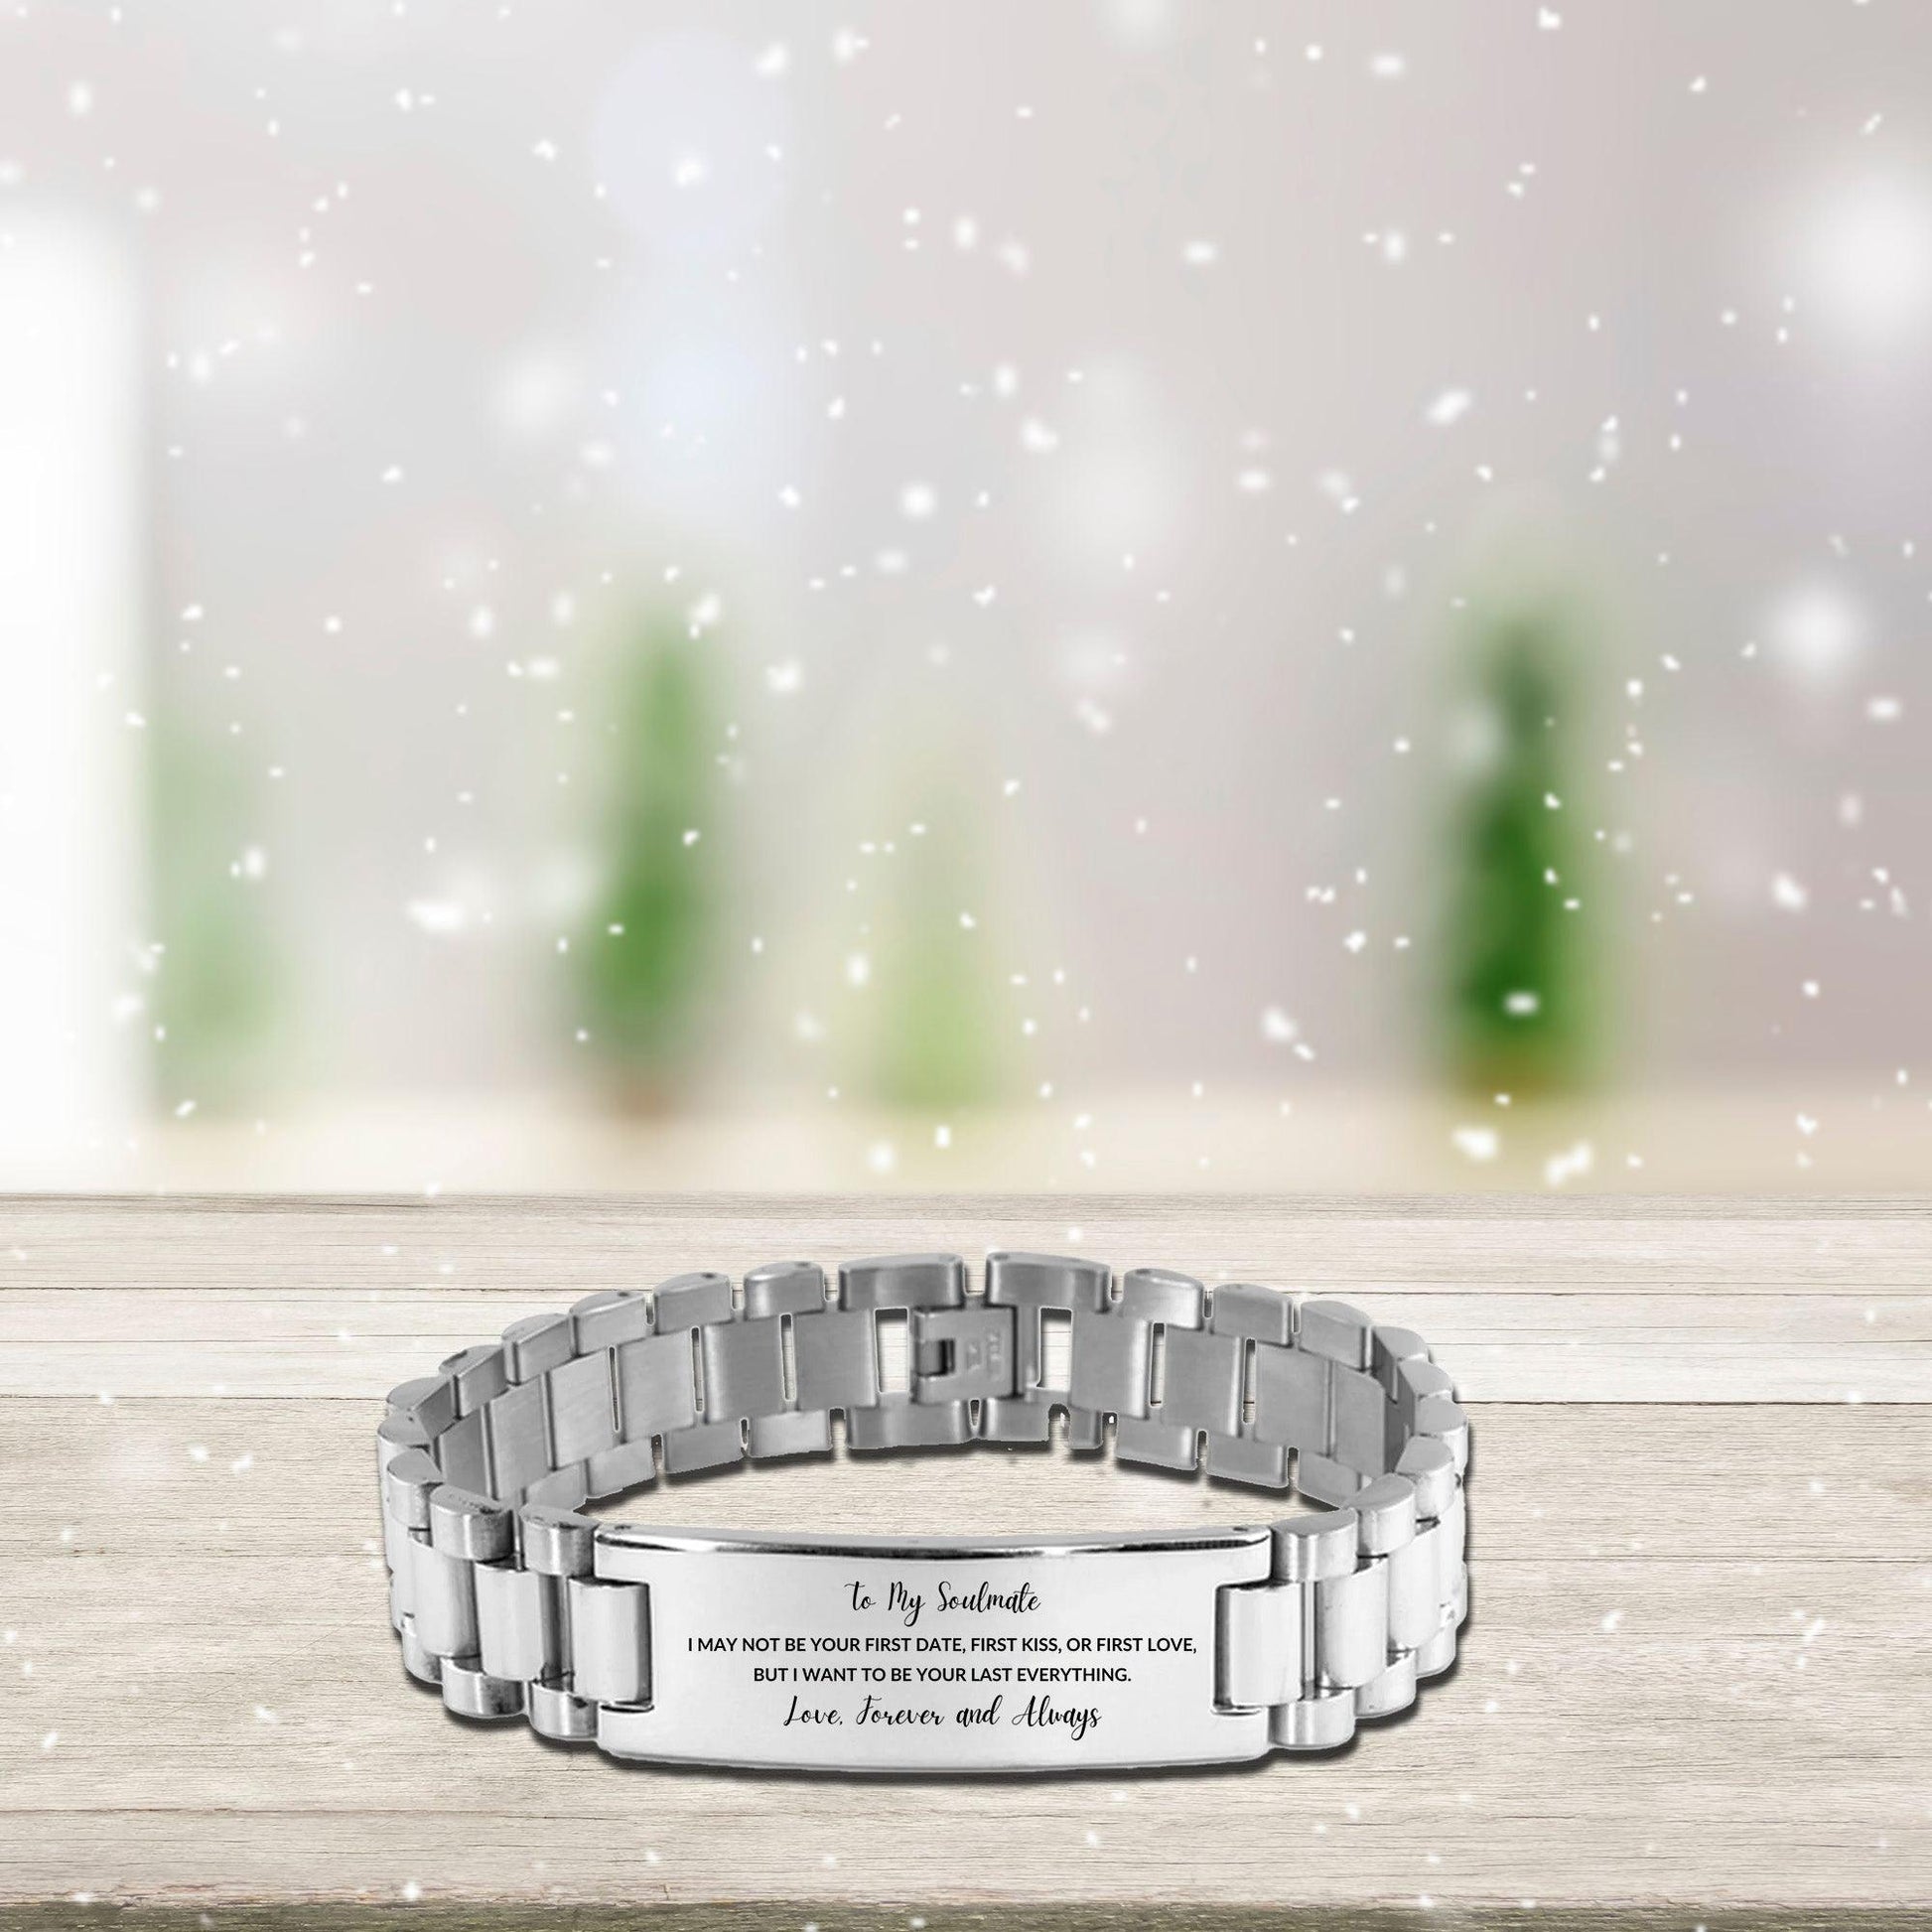 Romantic Soulmate Engraved Ladder Stainless Steel Bracelet - I Want to be Your Last Everything - Birthday, Christmas Holiday, Valentine Gifts - Mallard Moon Gift Shop